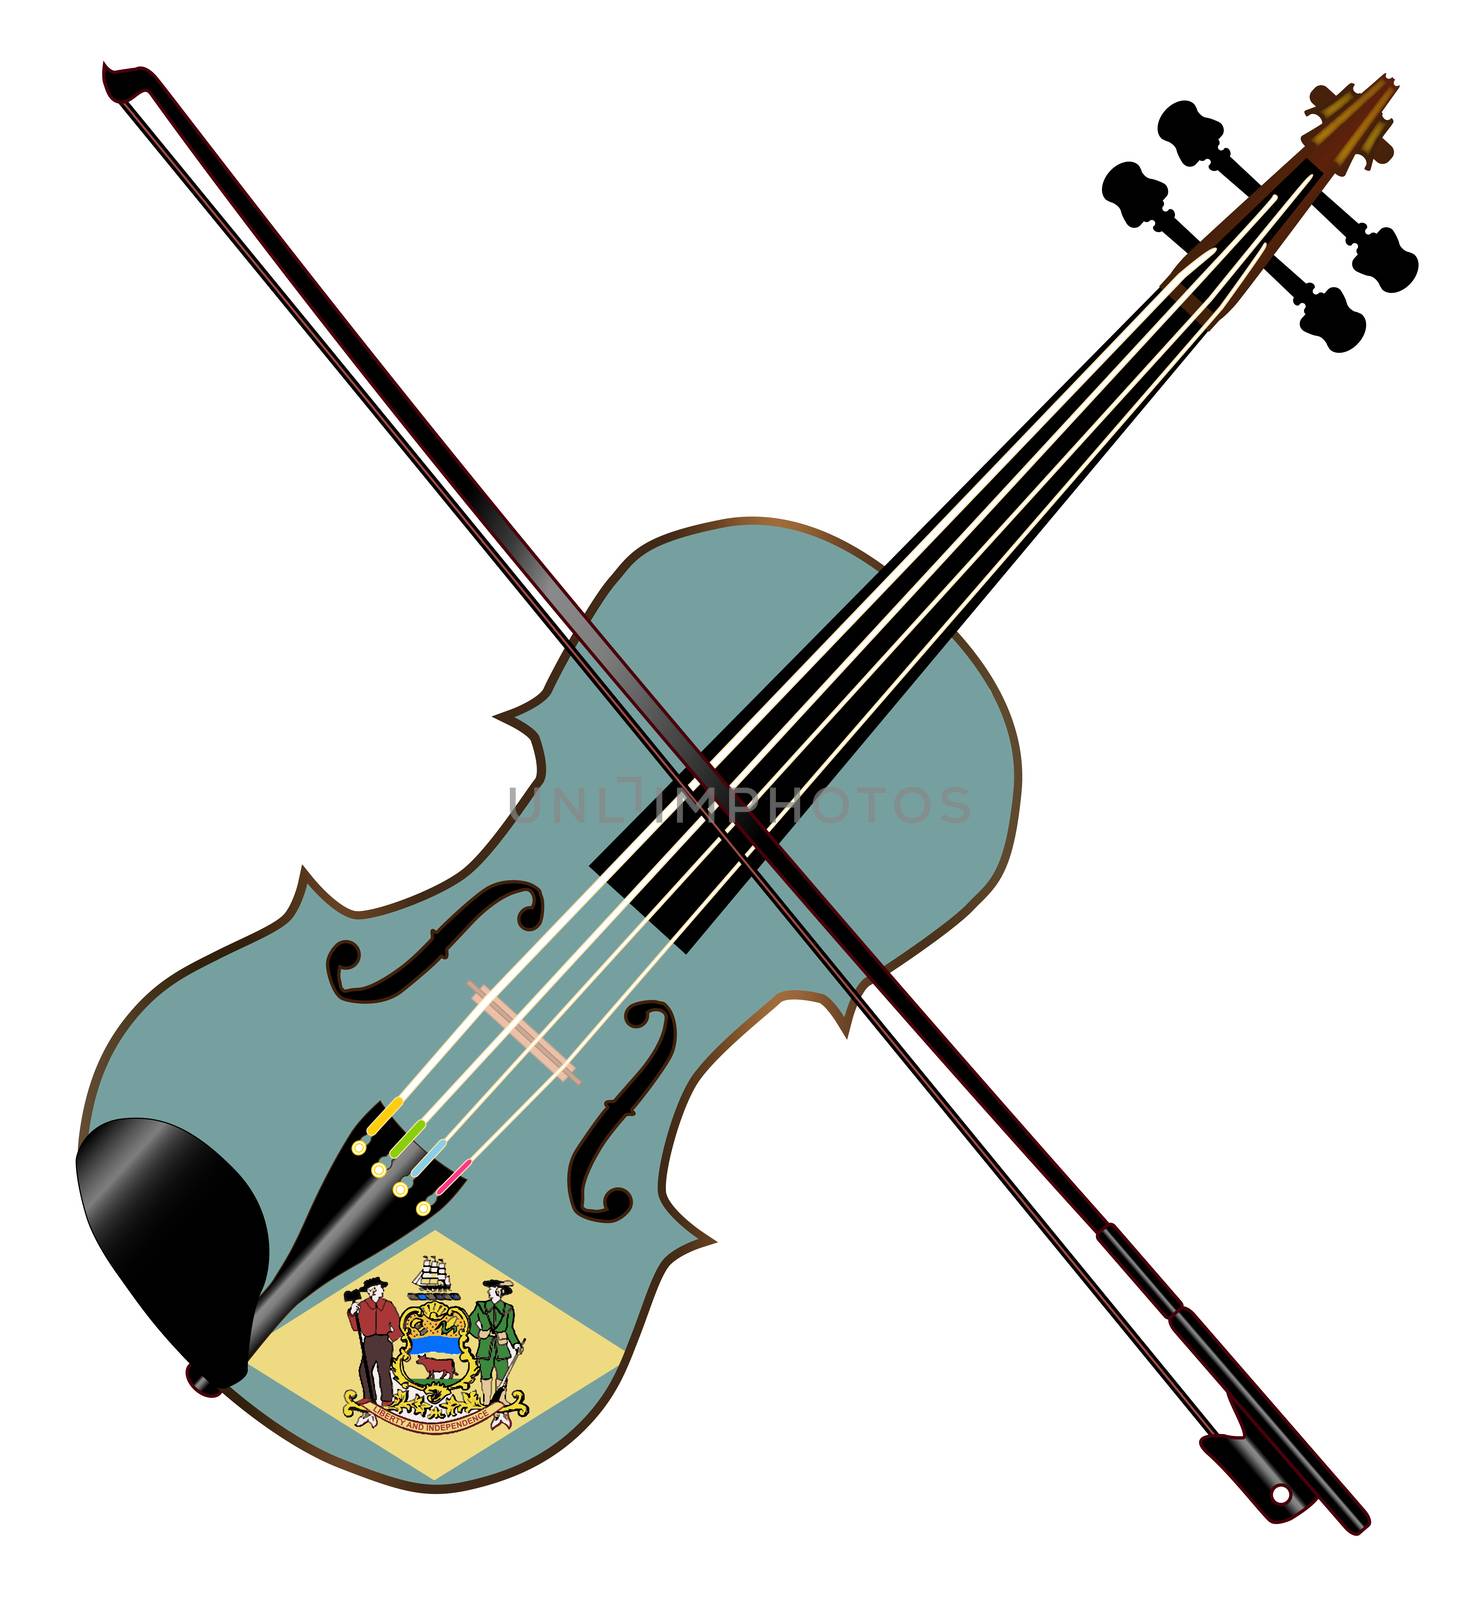 A typical violin with Delaware state flag and bow isolated over a white background